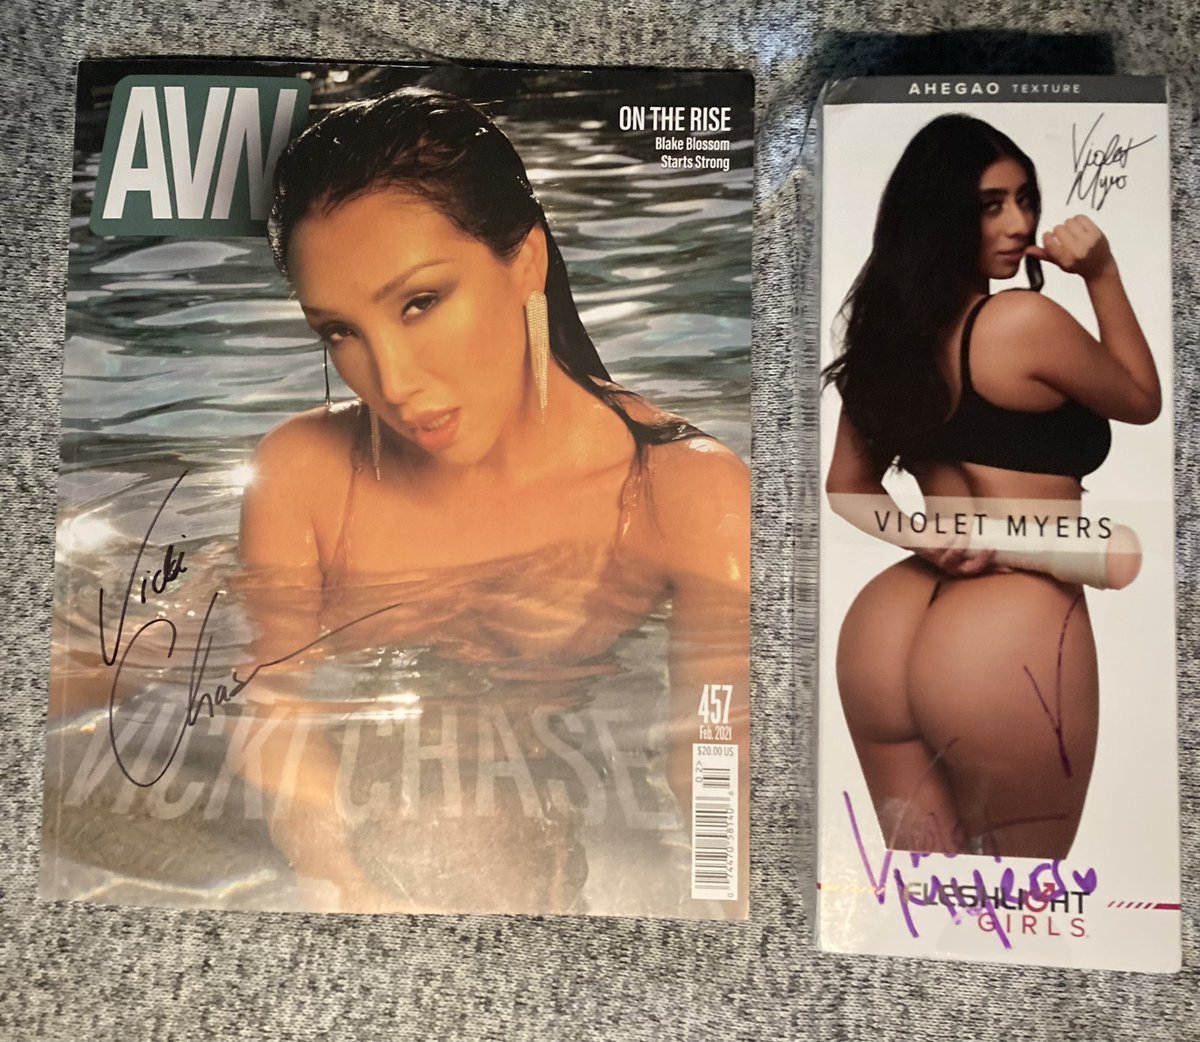 Been away for a few days. Still riding the high from @EXXXOTICA last week. Special thanks to @VickiChase & @violetsaucy for my autographed magazine & fleshlight 🥰